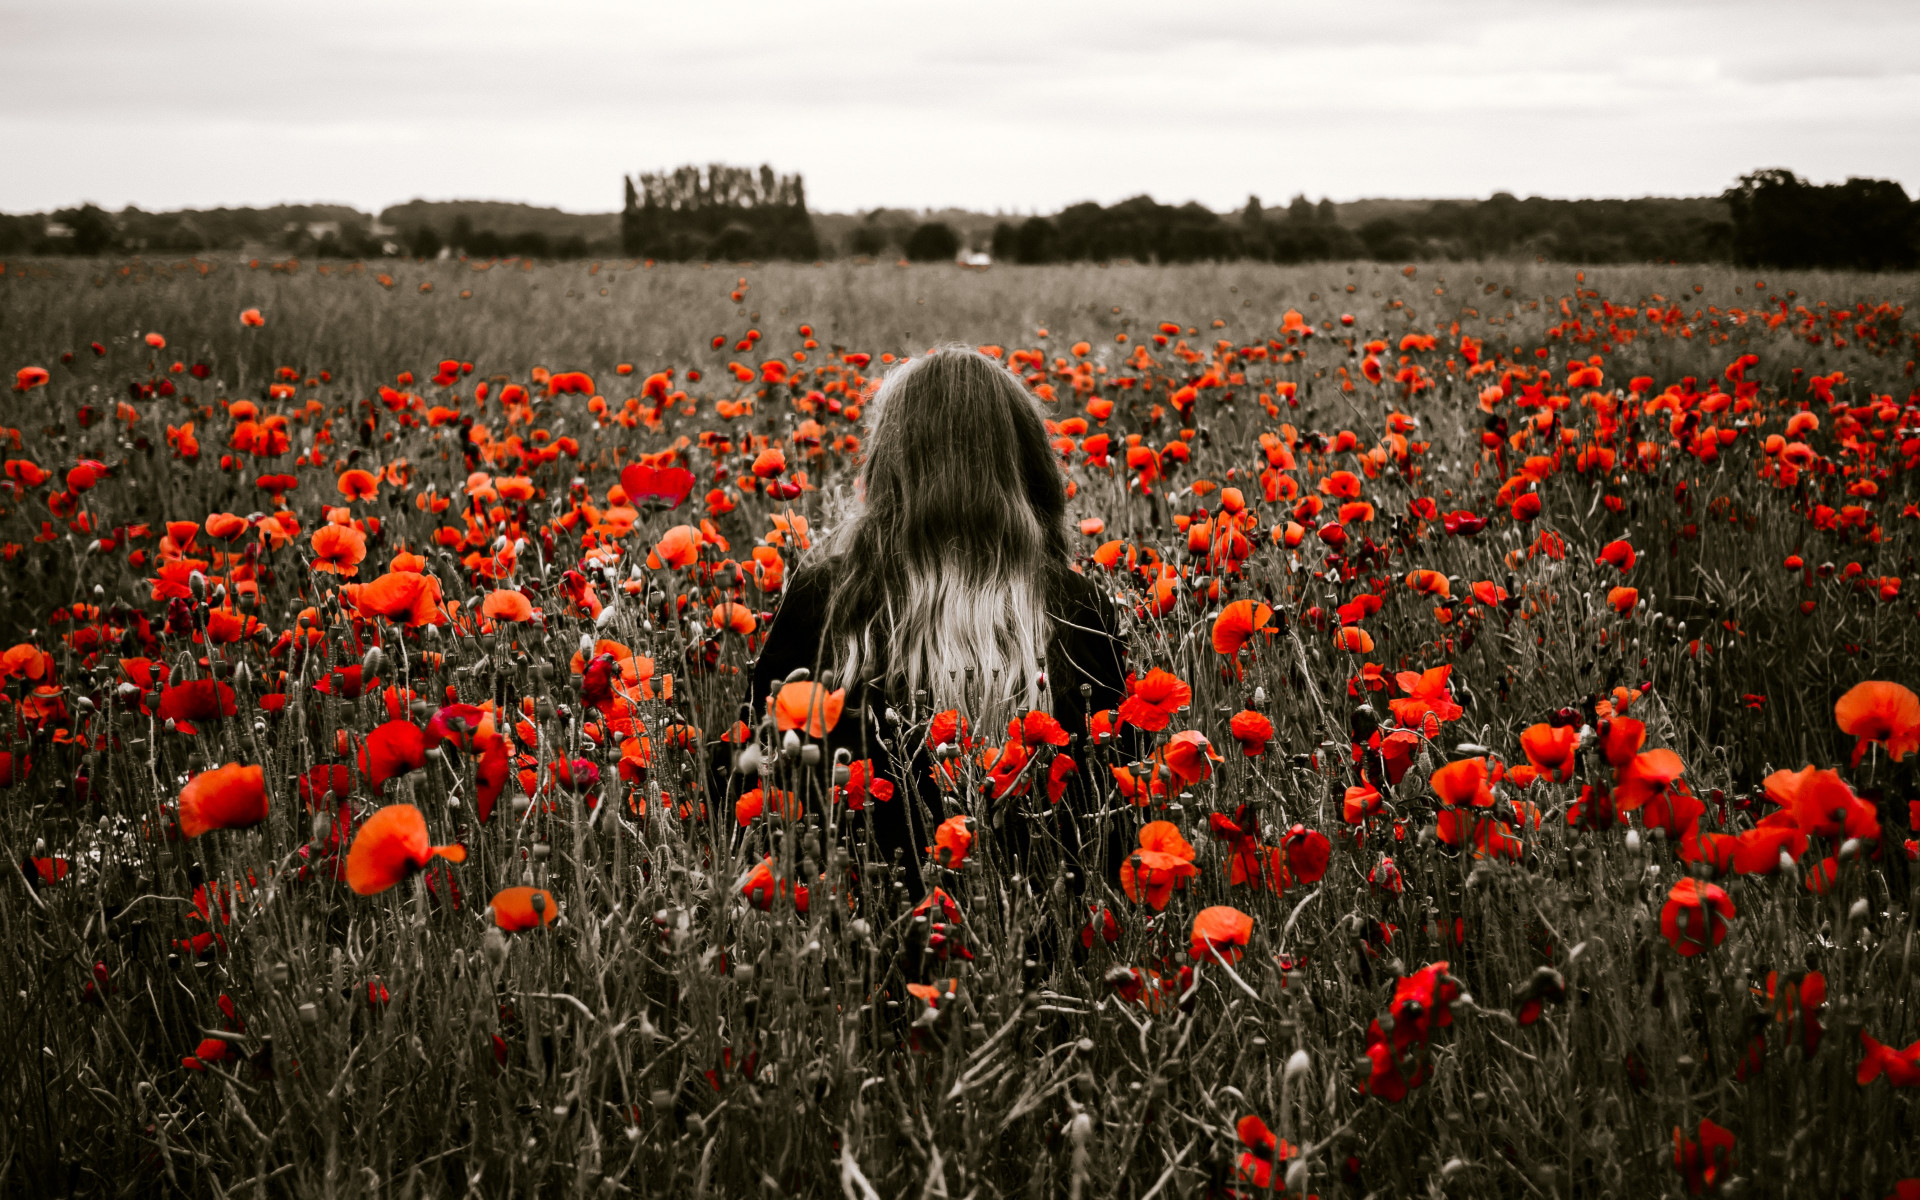 Girl in the field with red poppies wallpaper 1920x1200